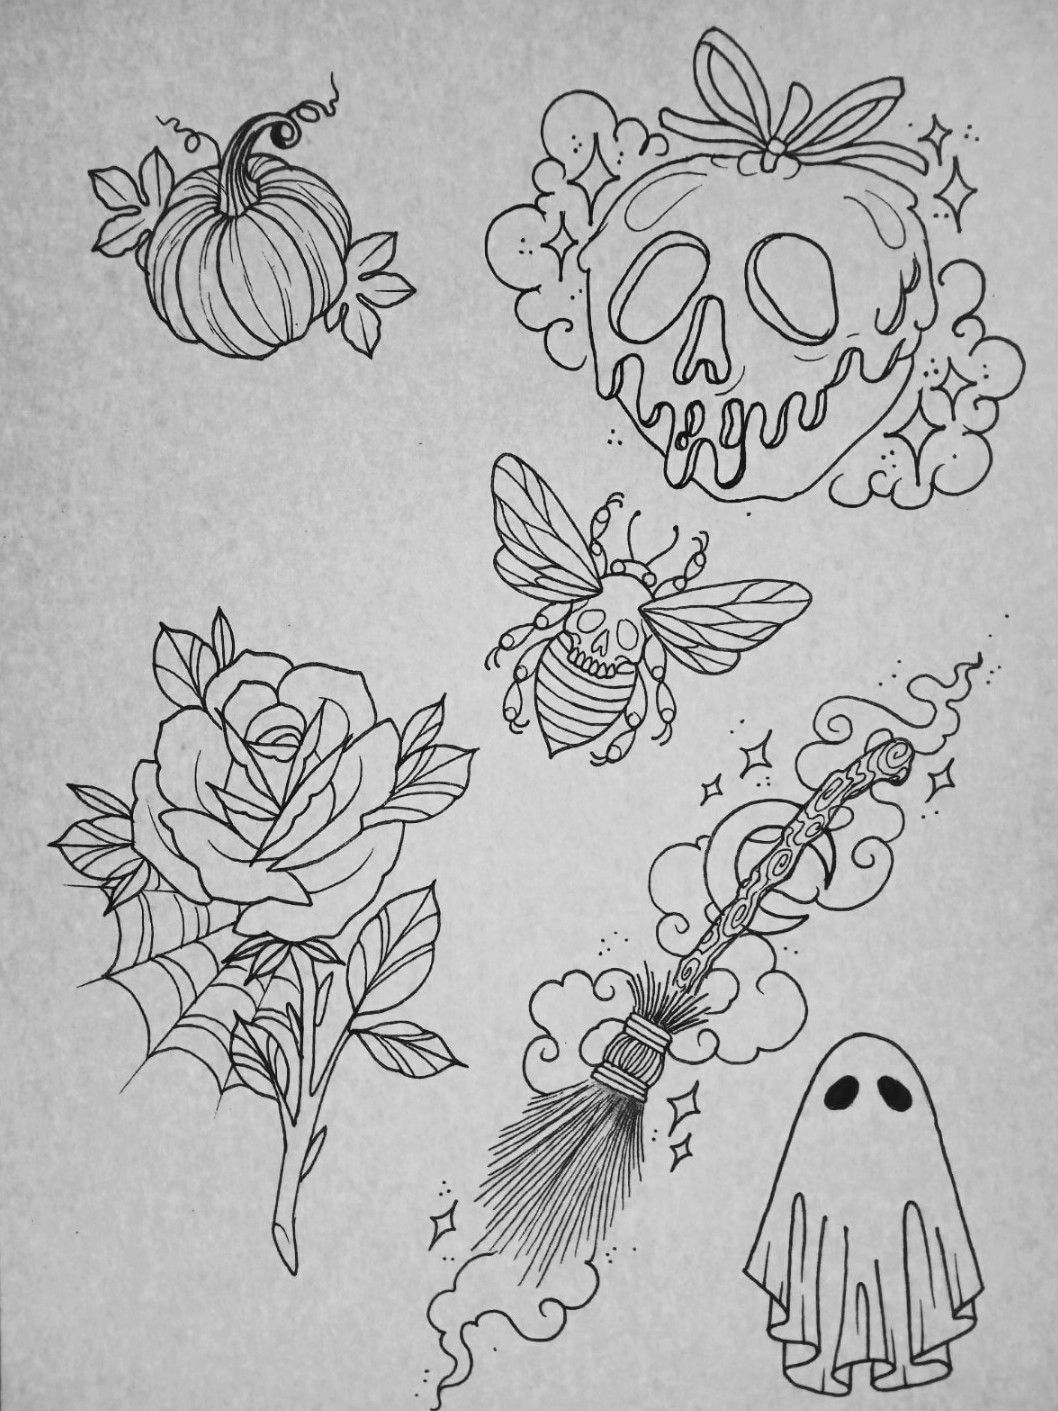 Wanderlust Tattoo  THIS SATURDAY Halloween flash  80 each Only 5  designs available now book in or walk in tattoo wanderlusttattoo  croydontattoo oldschooltattoo traditionaltattoo neotraditional neotrad  ink inked inkedup tattooflash tat 